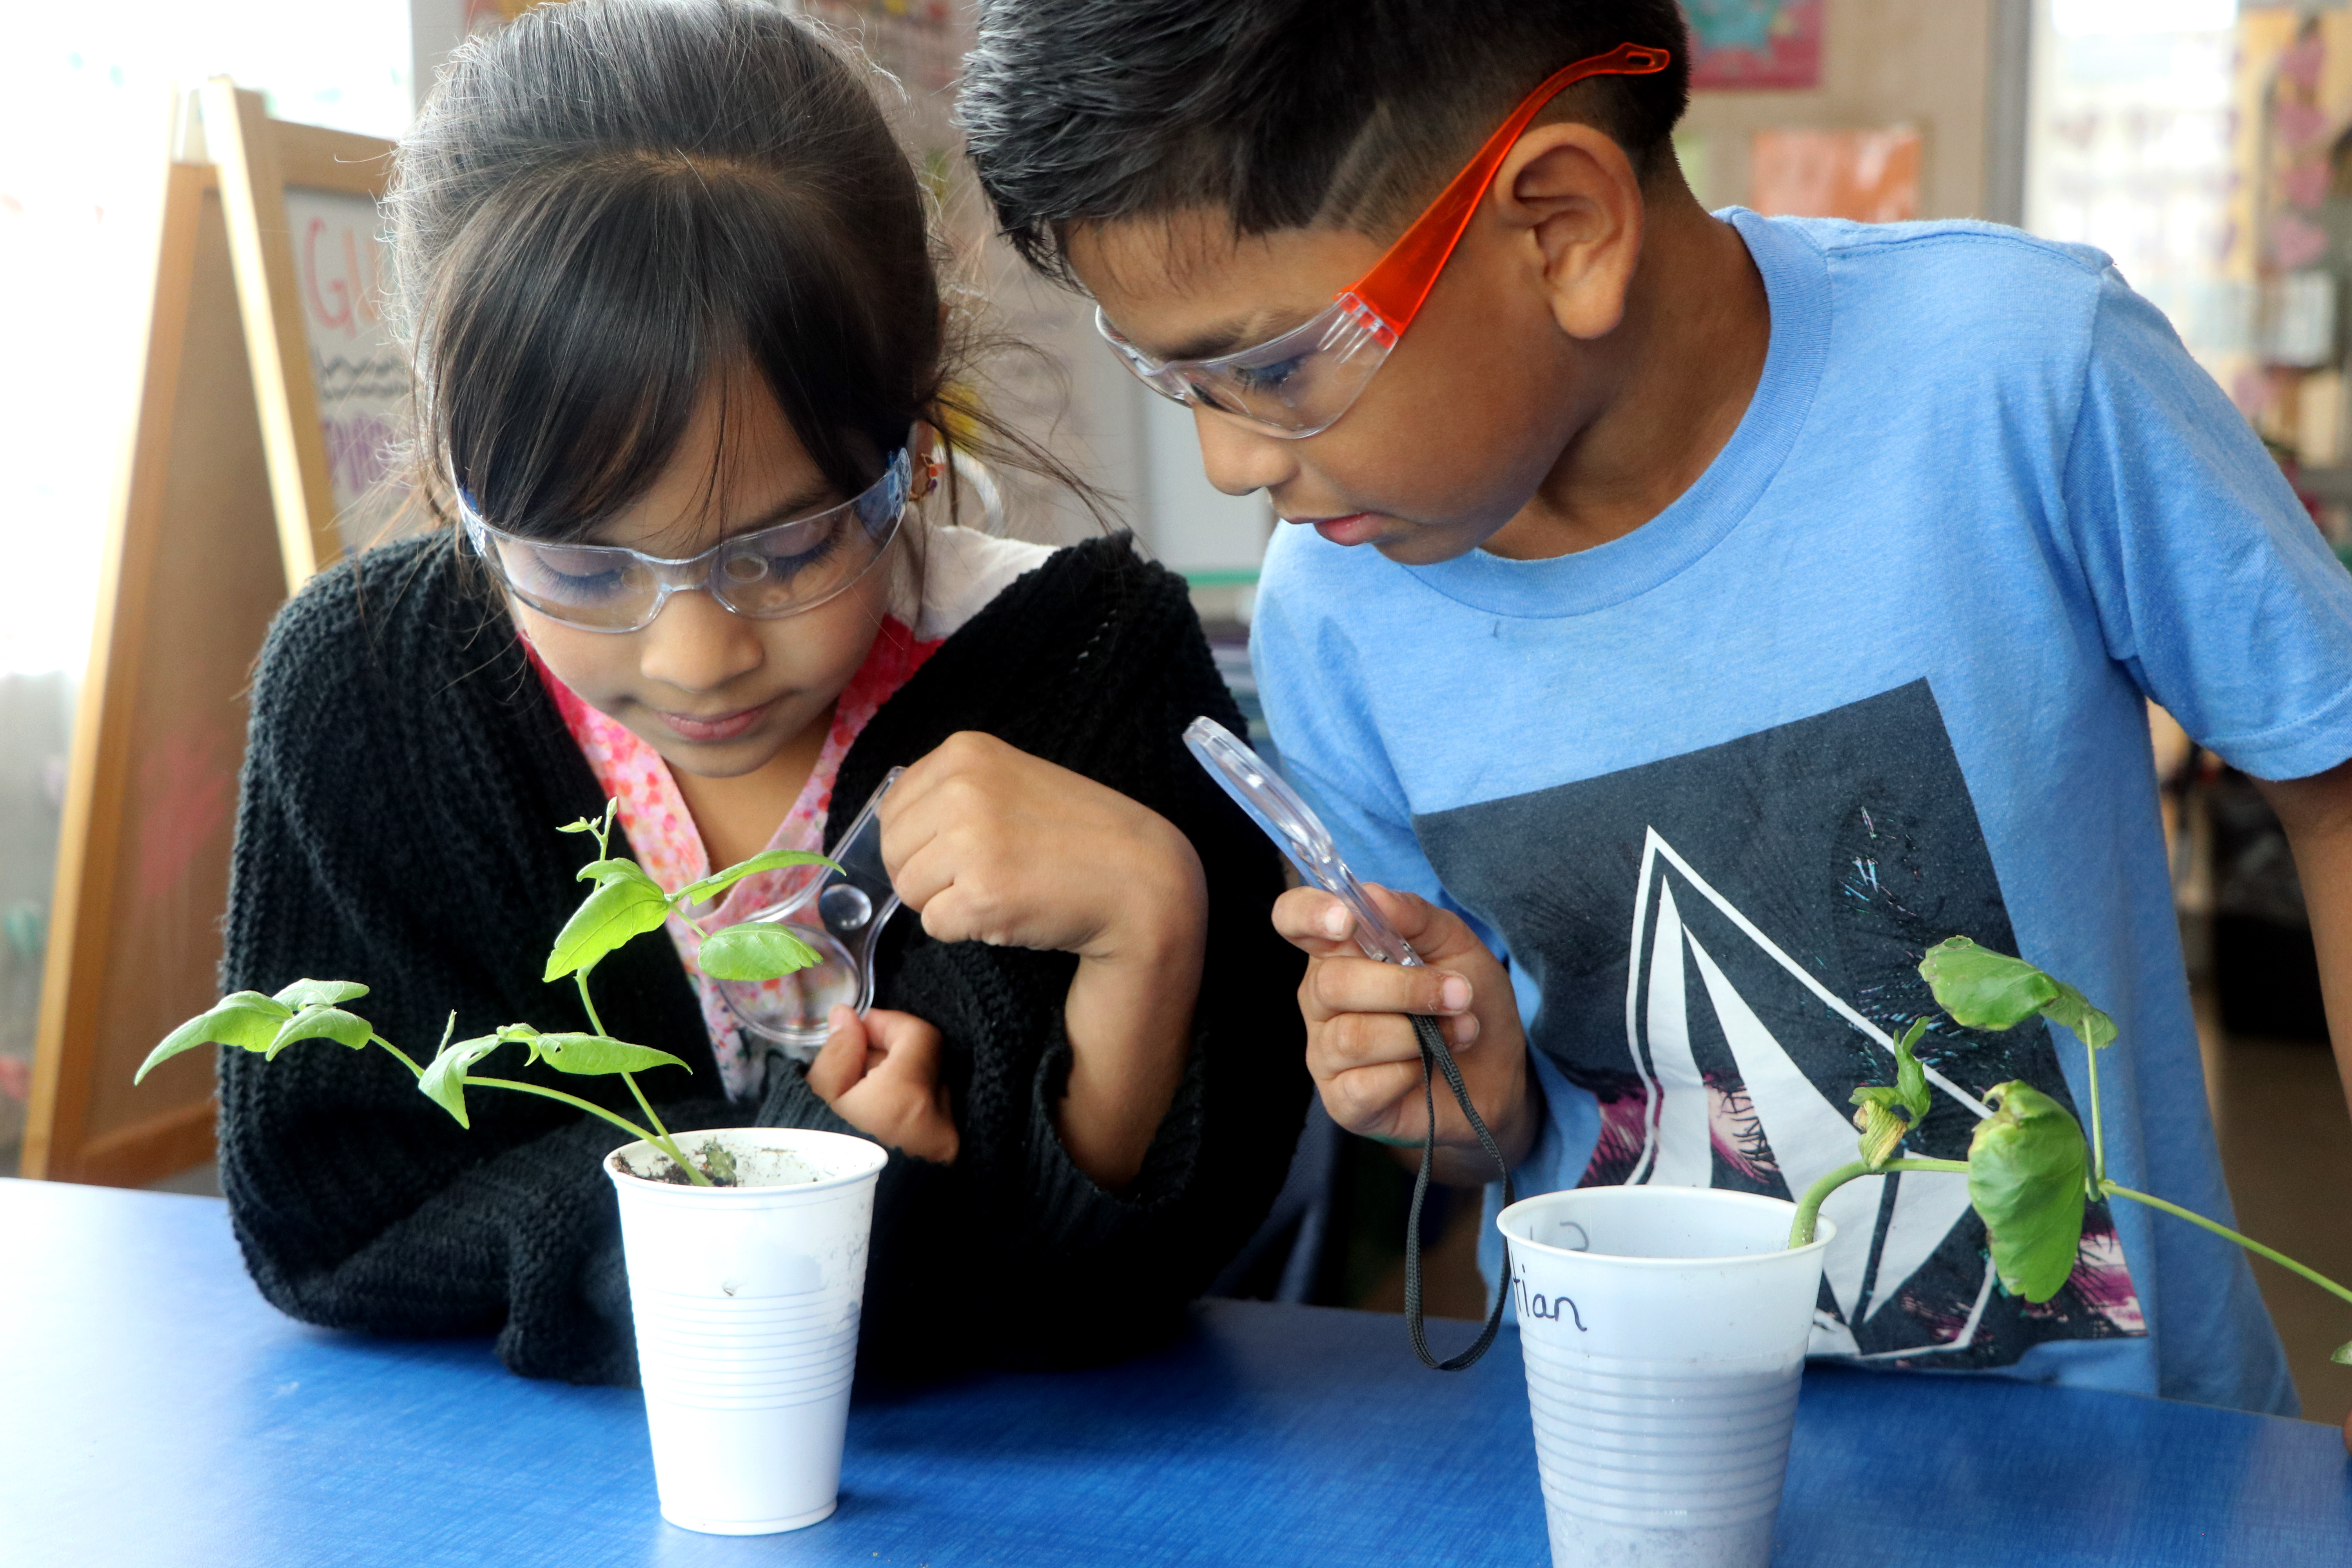 Two young students wearing safety goggles are closely examining plants in white cups using magnifying glasses. 